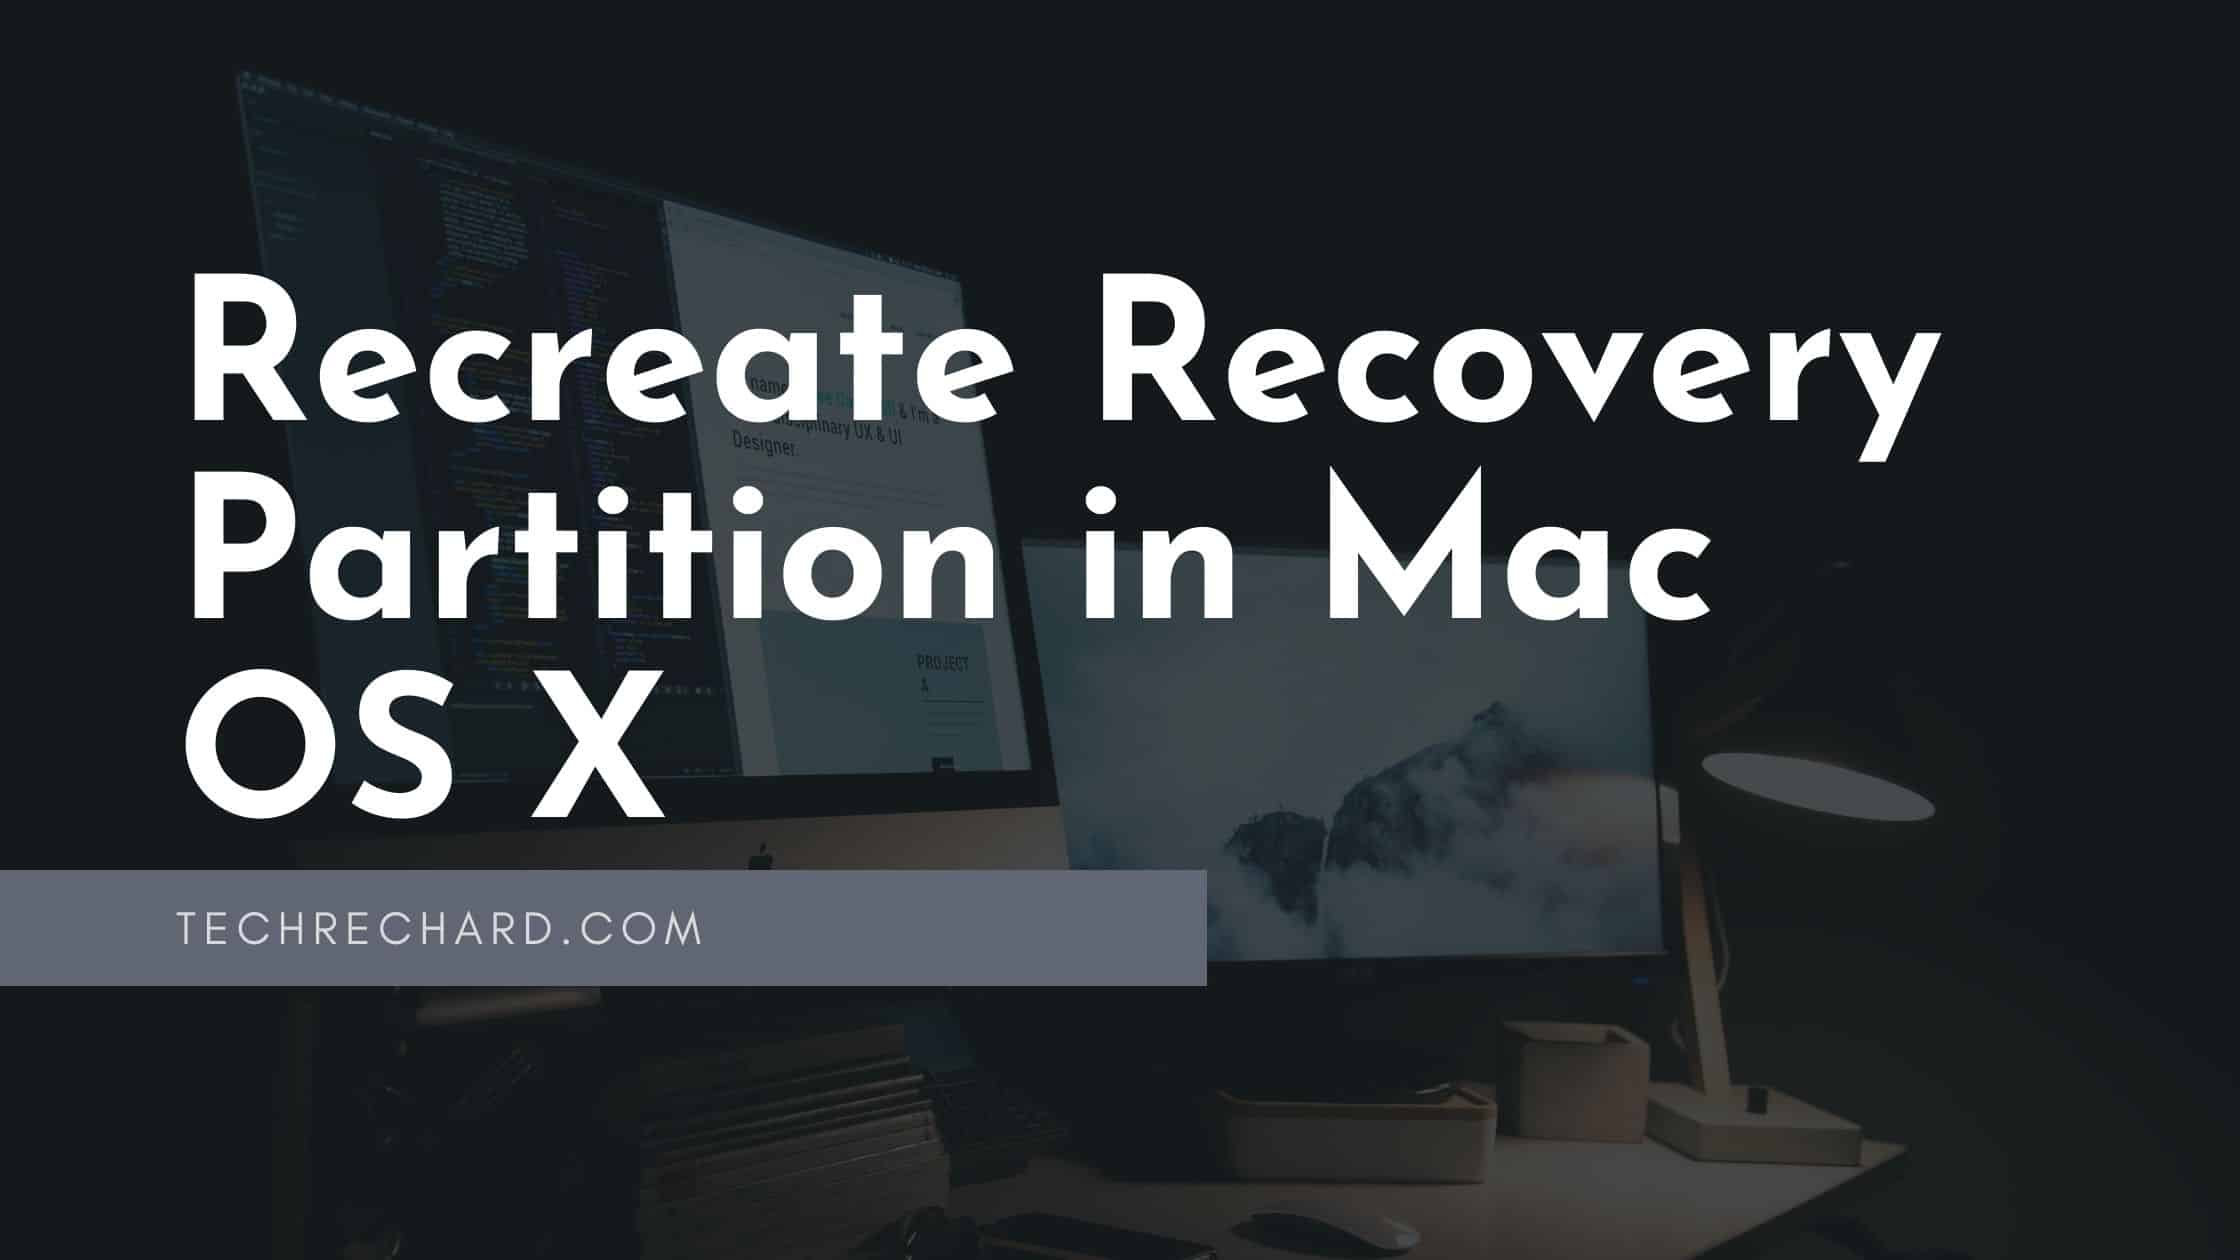 How to Recreate Recovery Partition in Mac OS X